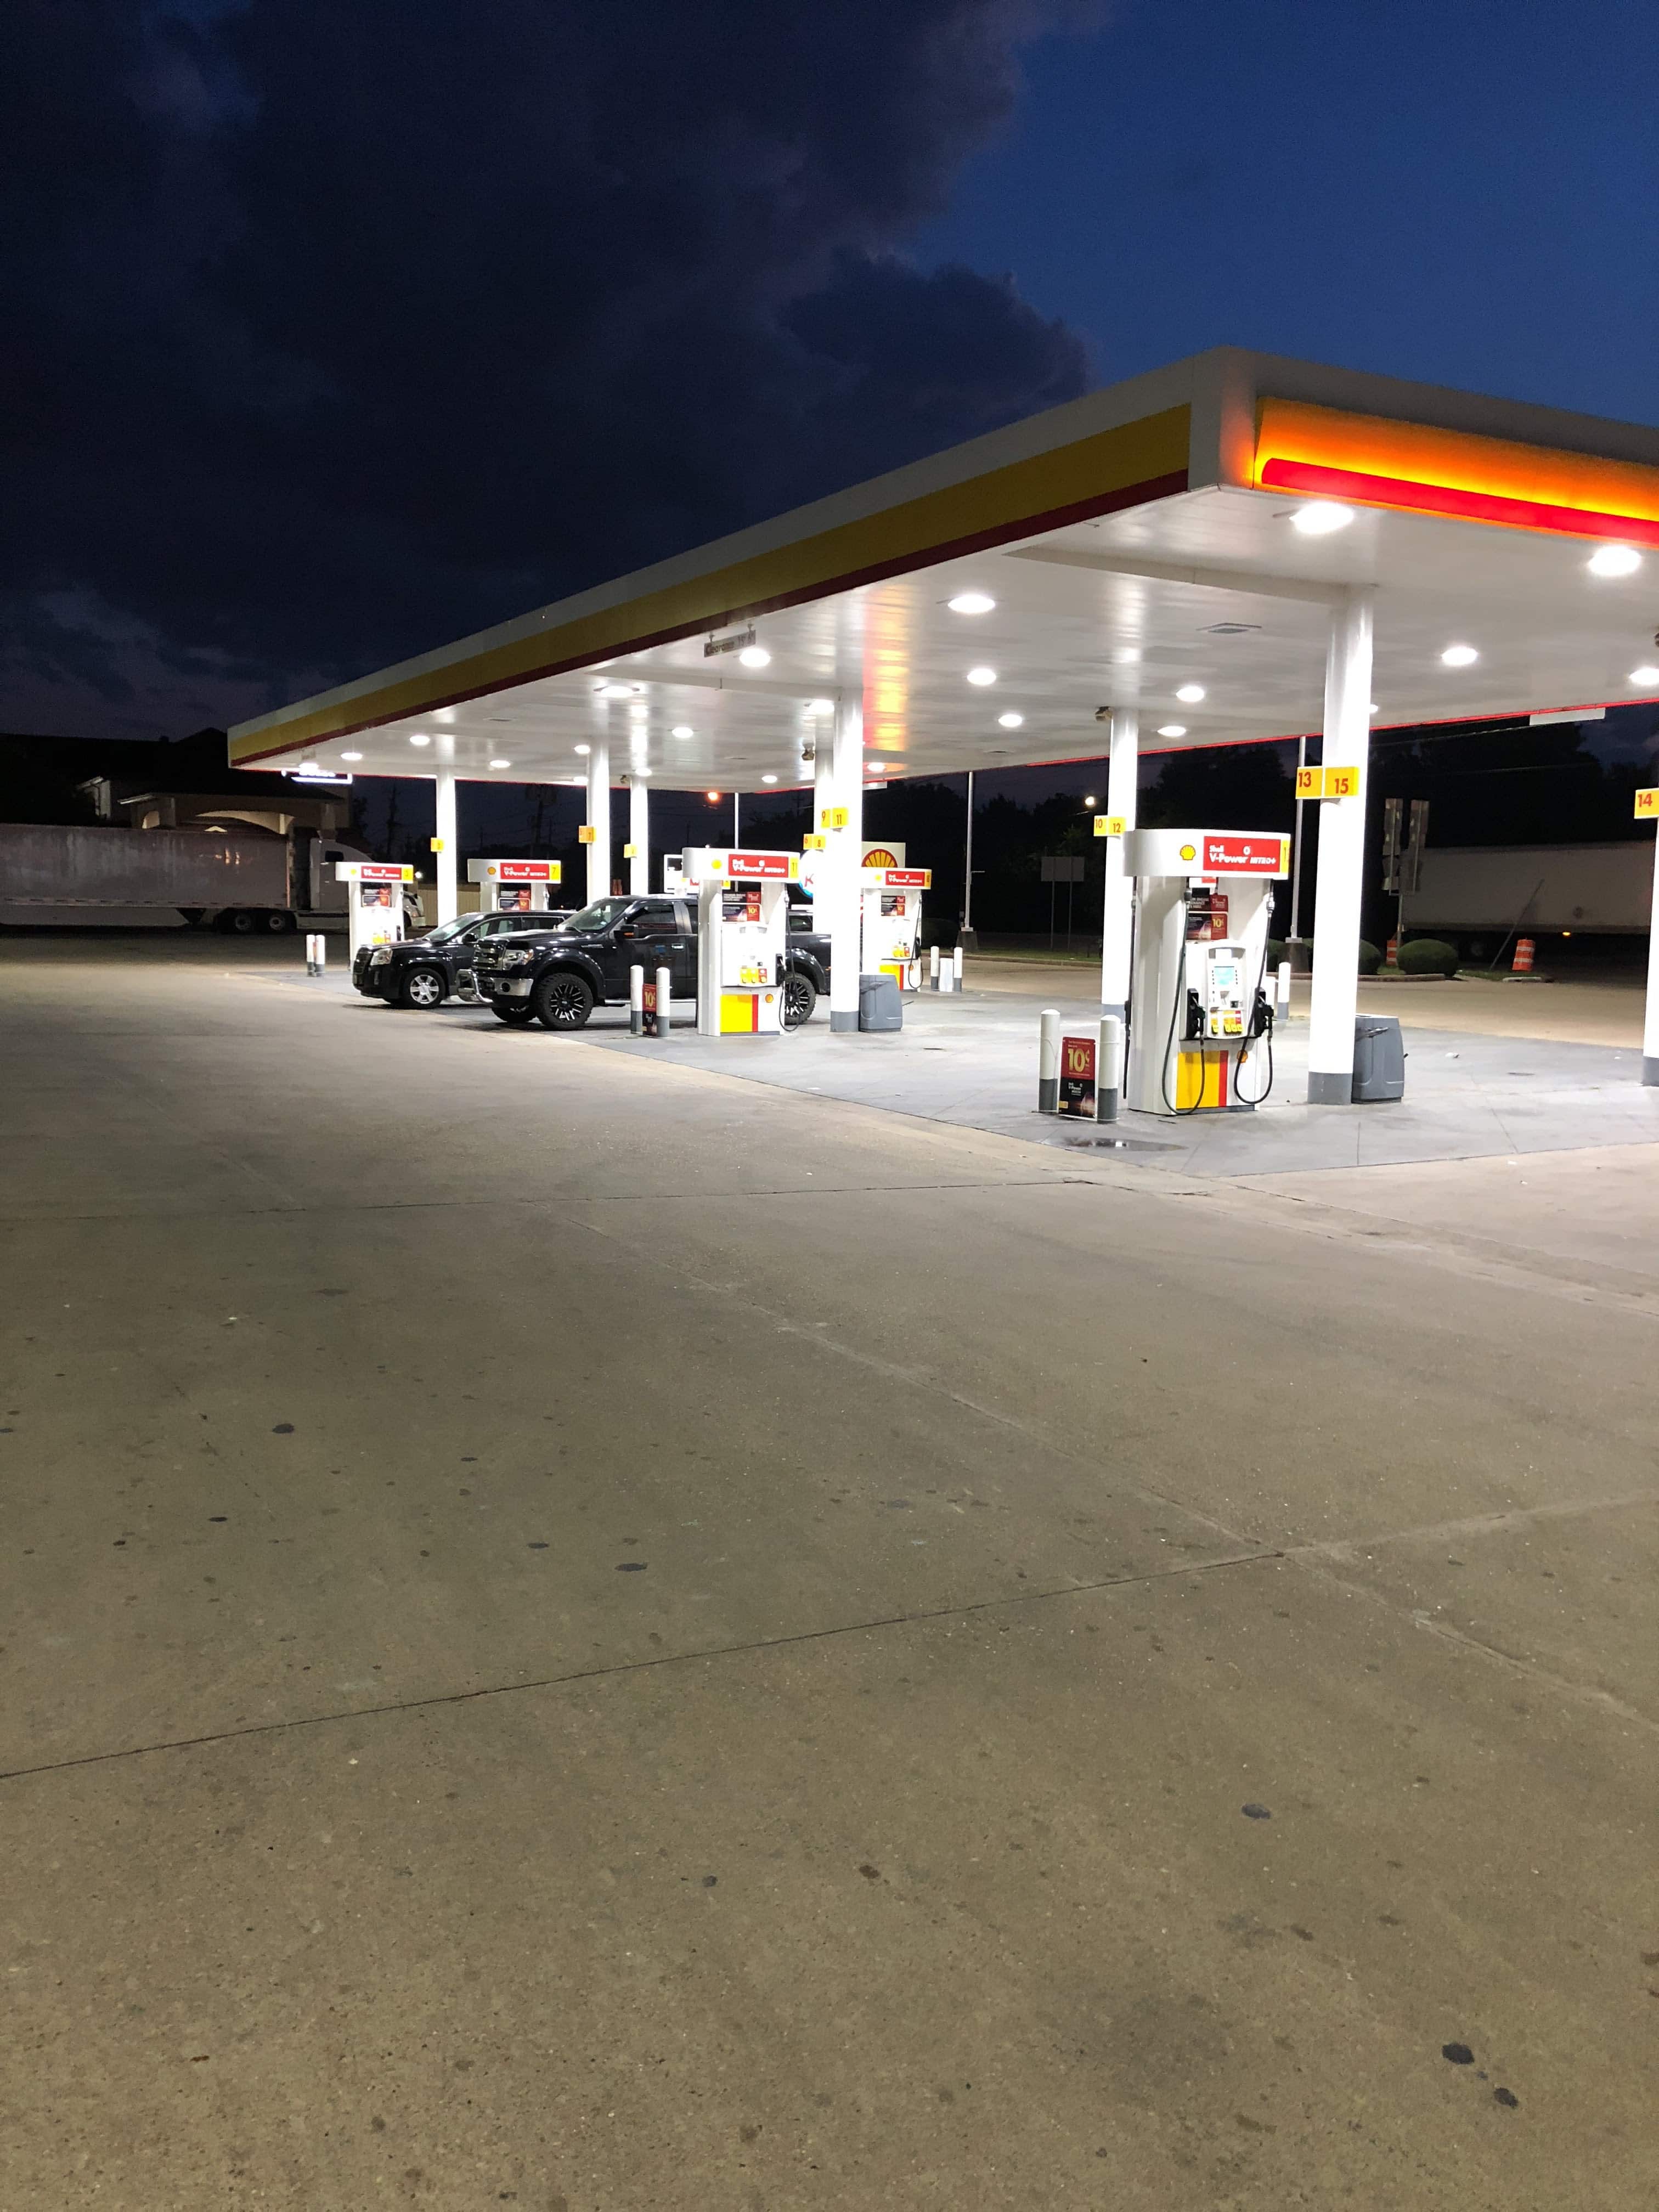 Shell - Houston (TX 77075), US, gas station near by